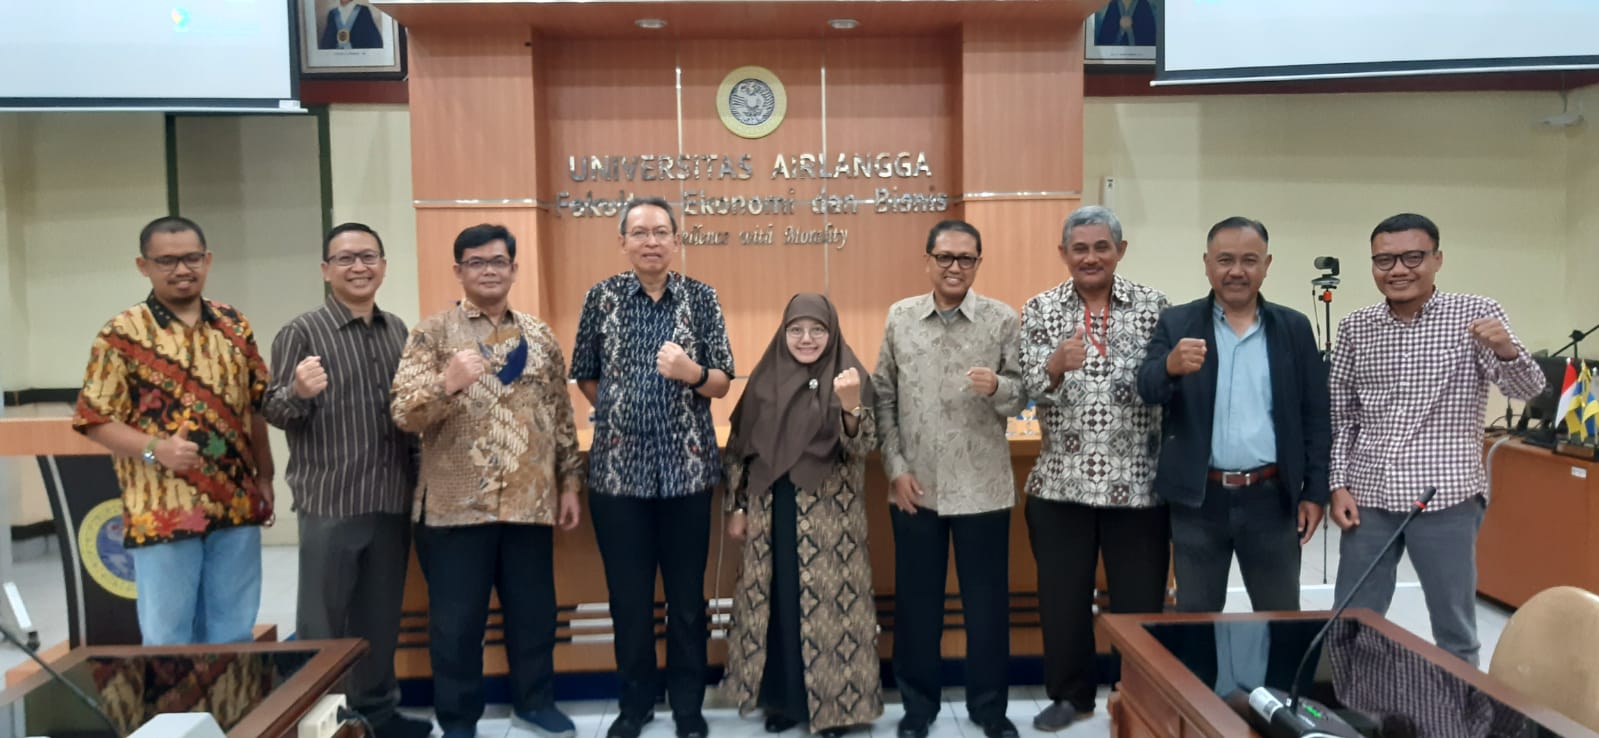 The Department of Islamic Economics initiated a Publication Research Collaboration with the East Java Islamic Economic Community (MES), and the East Java Association of Islamic Economic Experts (IAEI)